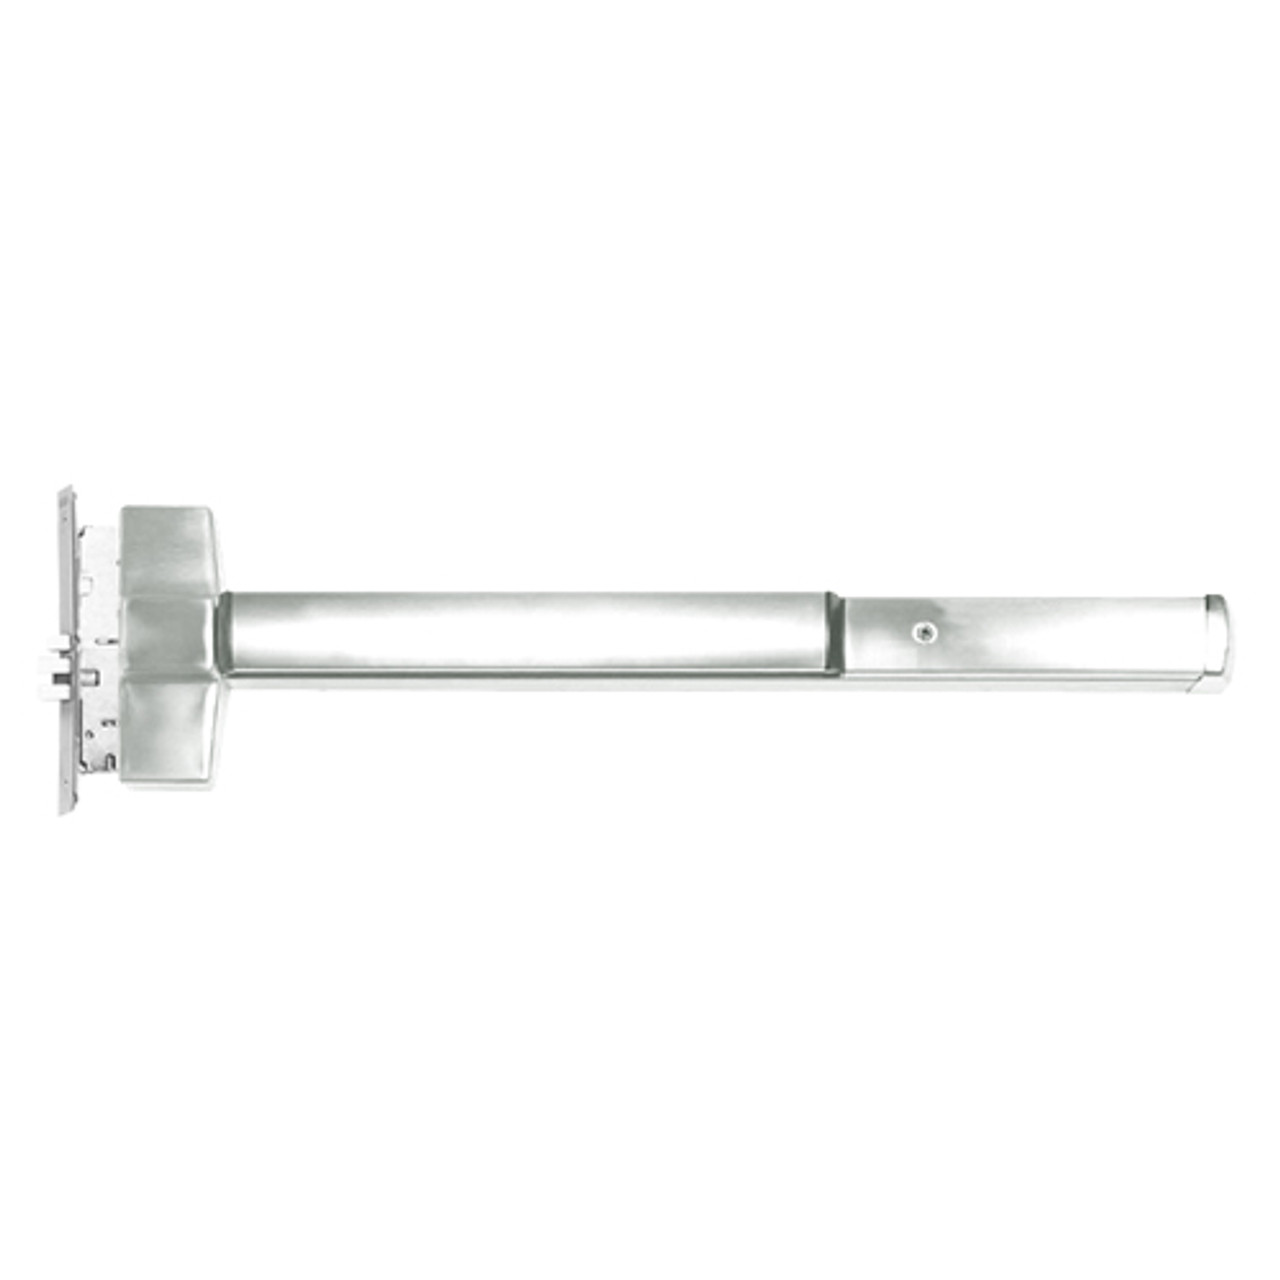 ED5600LD-618-RHR Corbin ED5600 Series Non Fire Rated Mortise Exit Device with Delayed Egress in Bright Nickel Finish